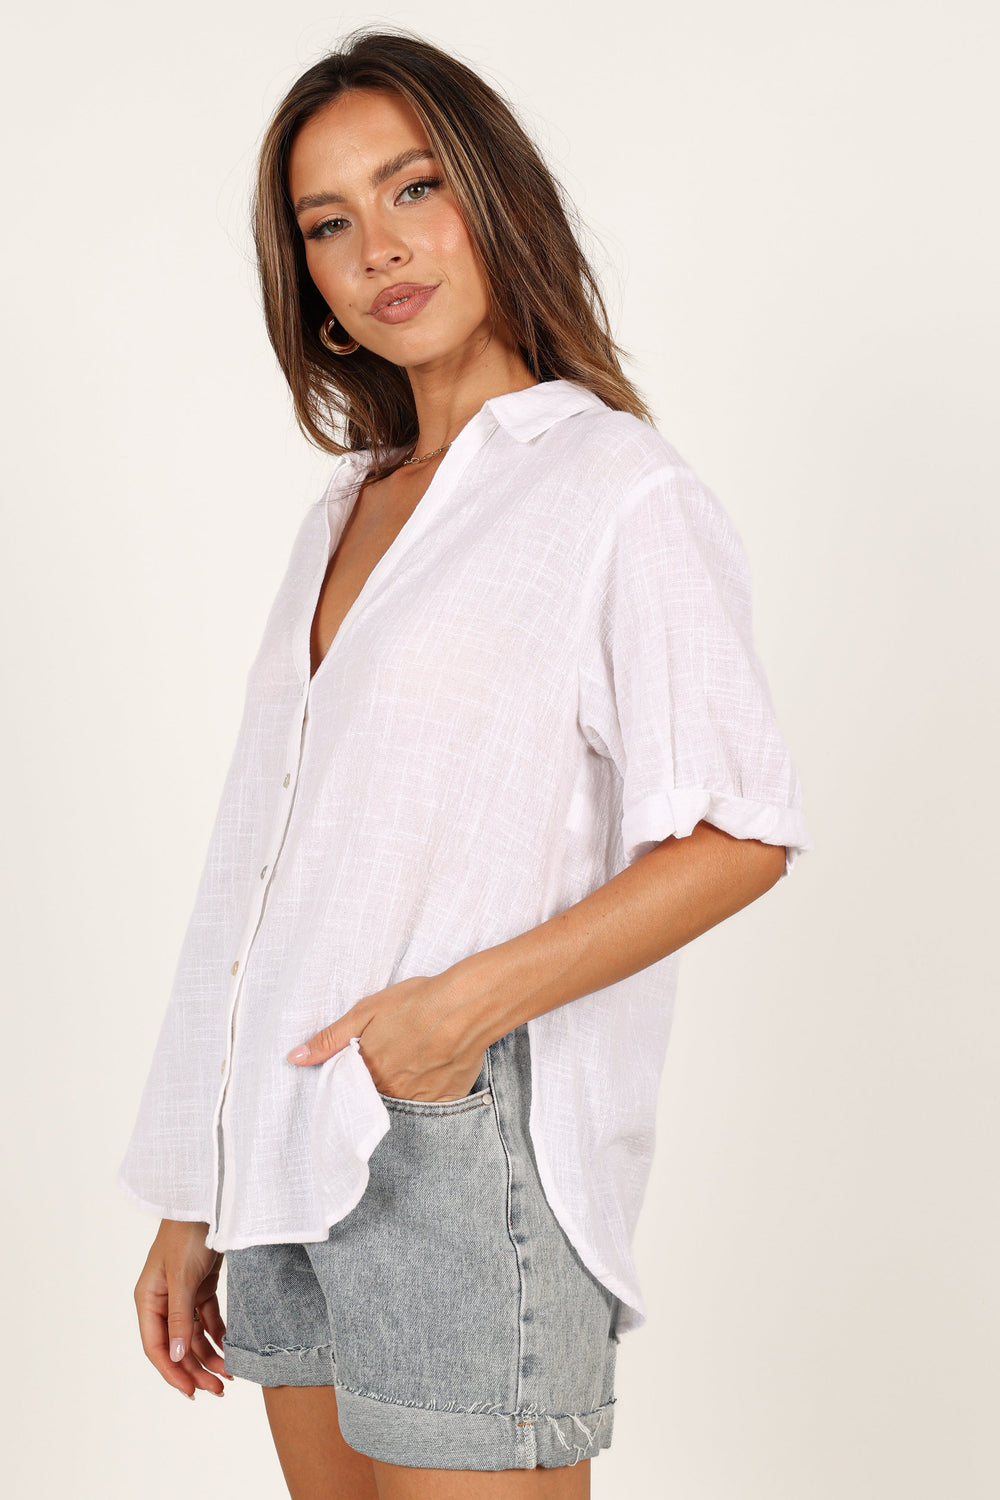 TOPS Dion Top - White